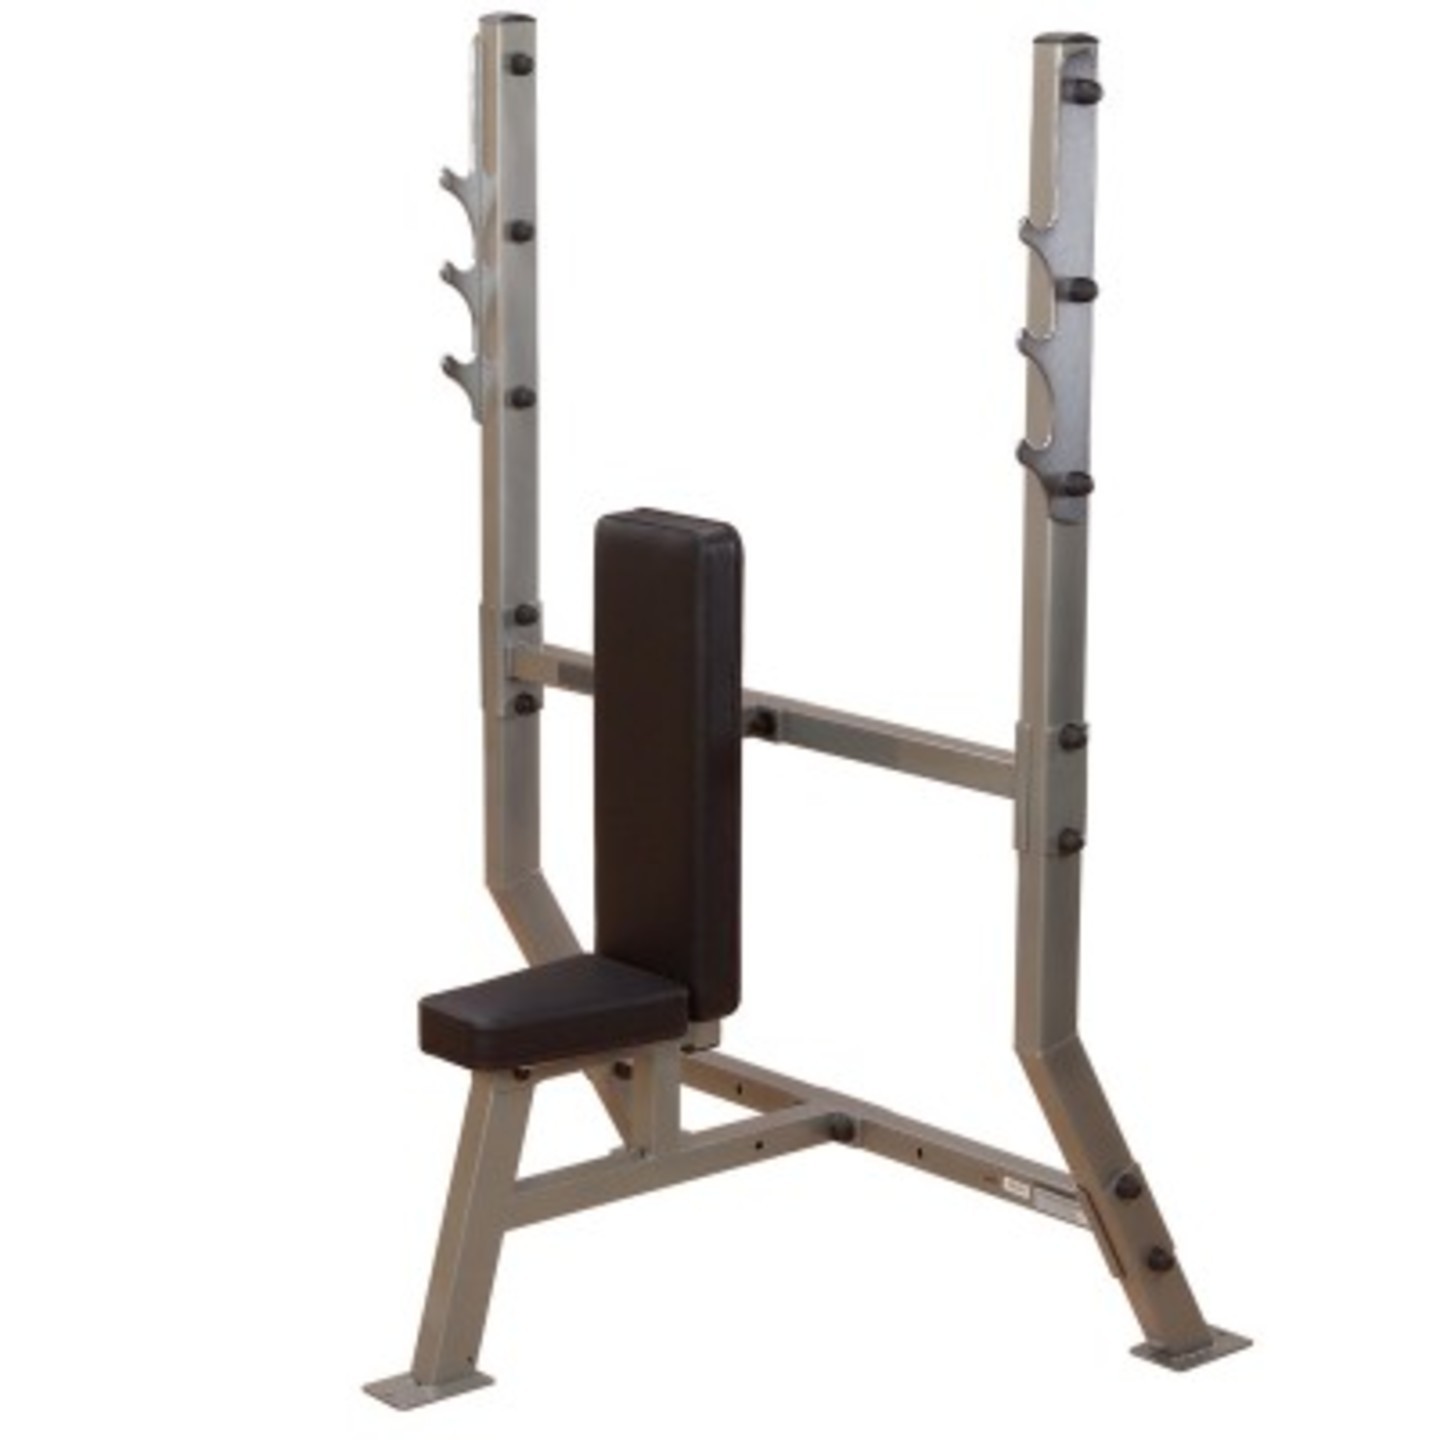 Body-Solid Full Commercial Olympic Shoulder Press Bench SPB368G